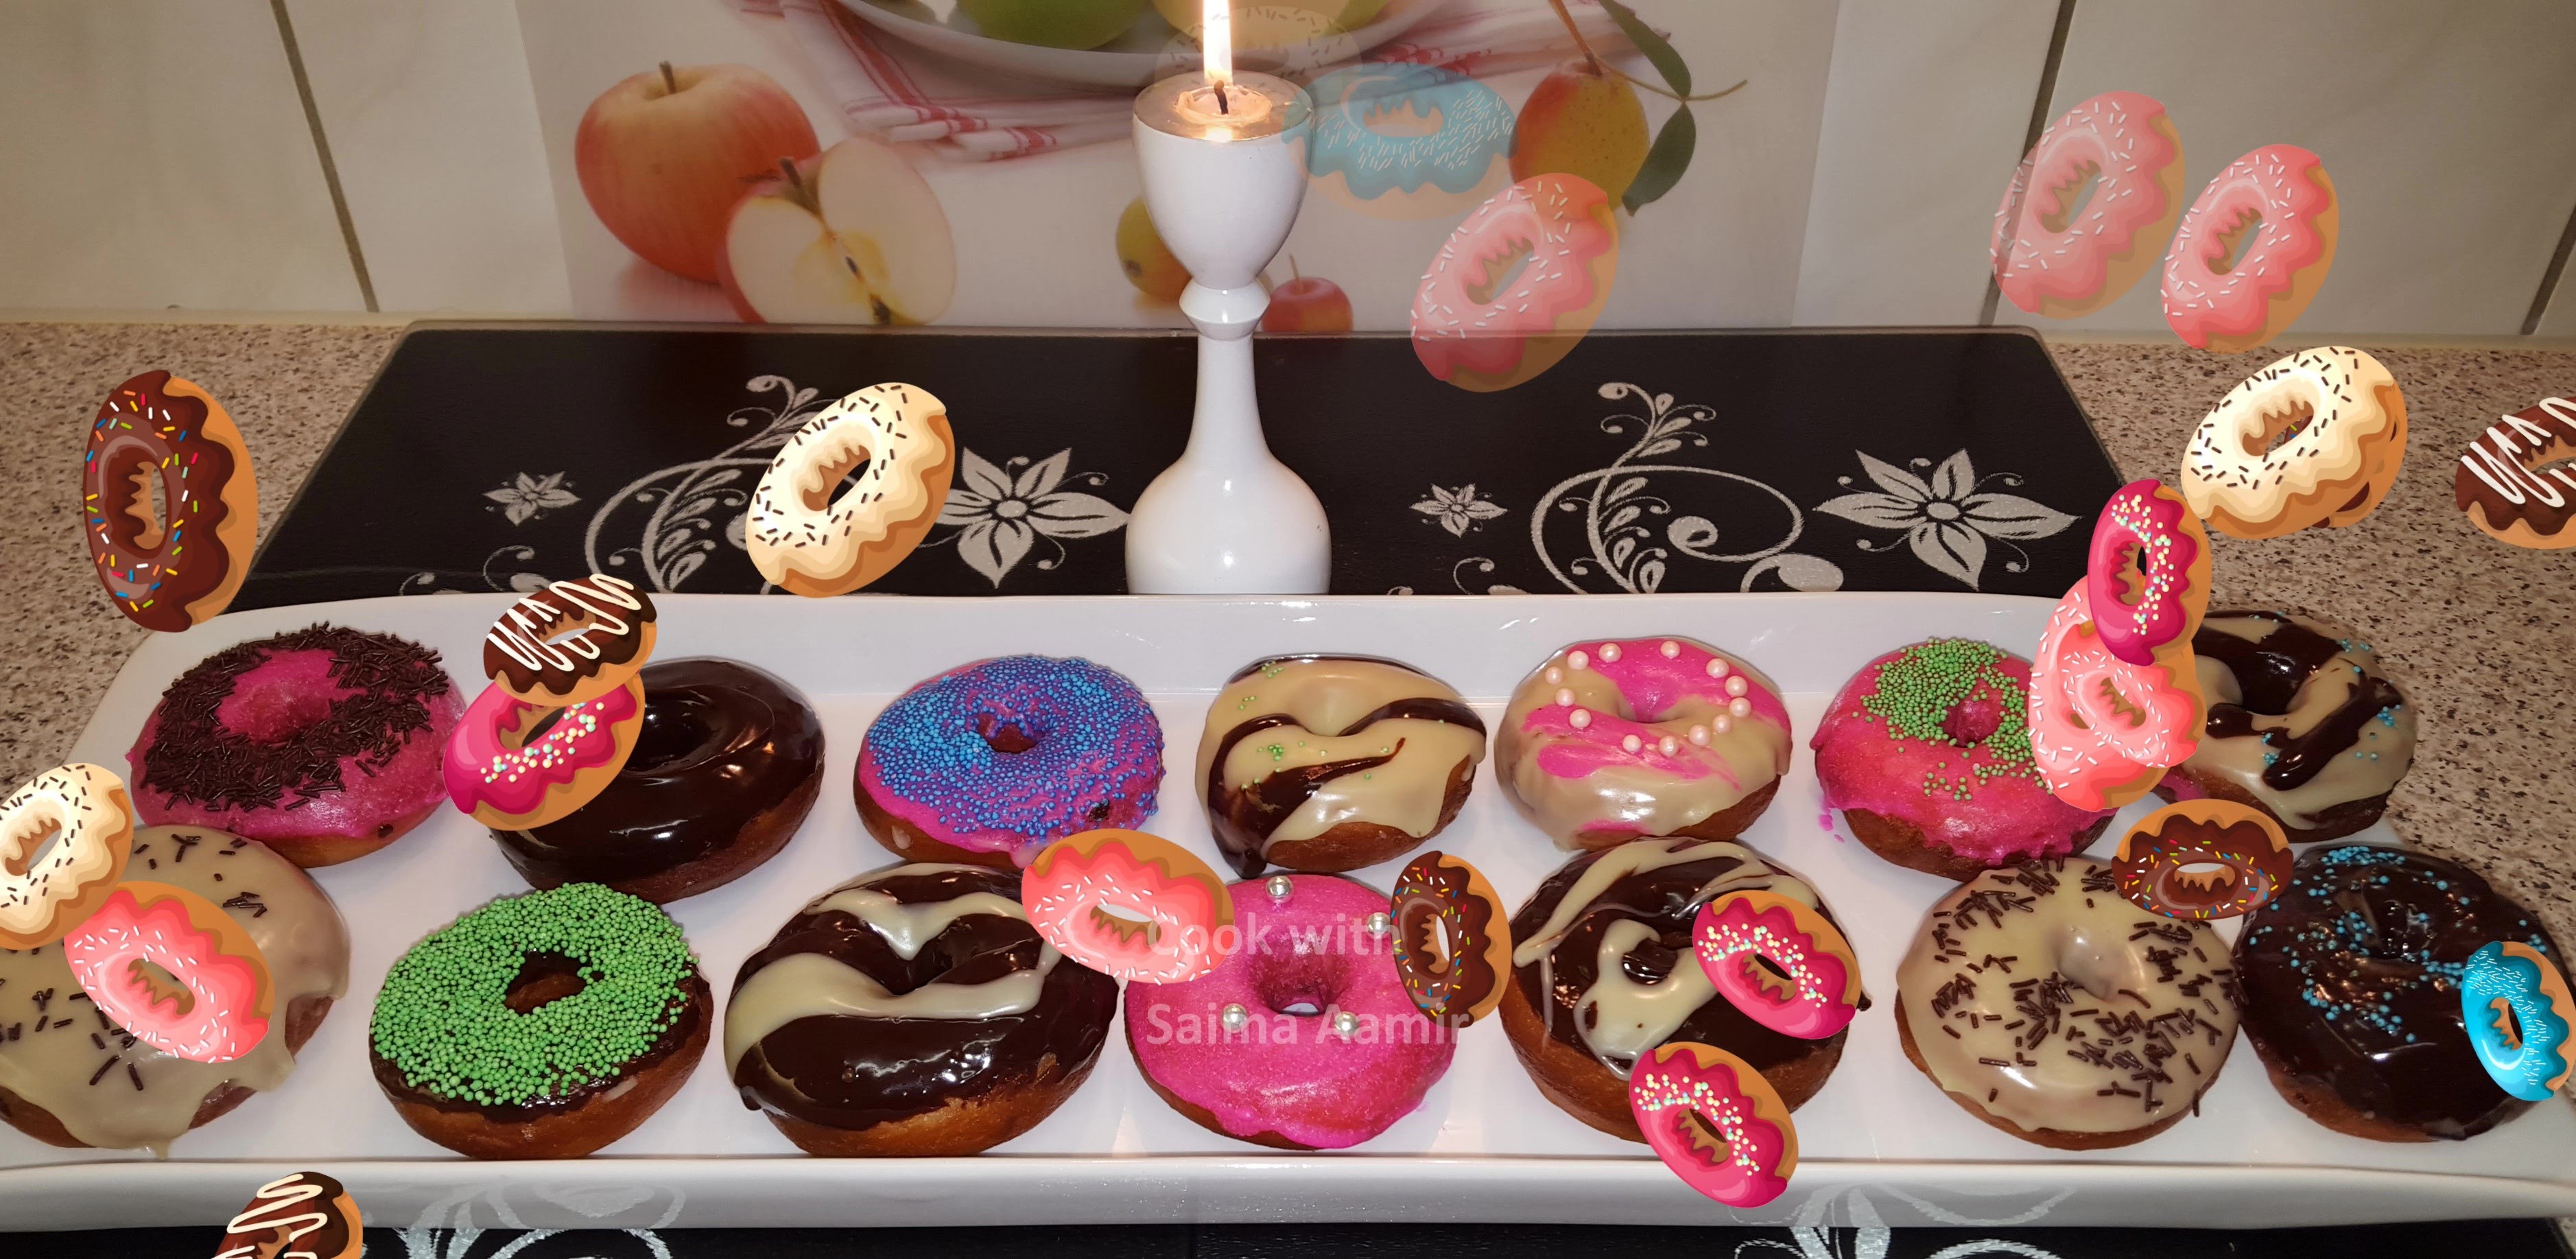 Donuts ڈونٹس / Cook With Saima